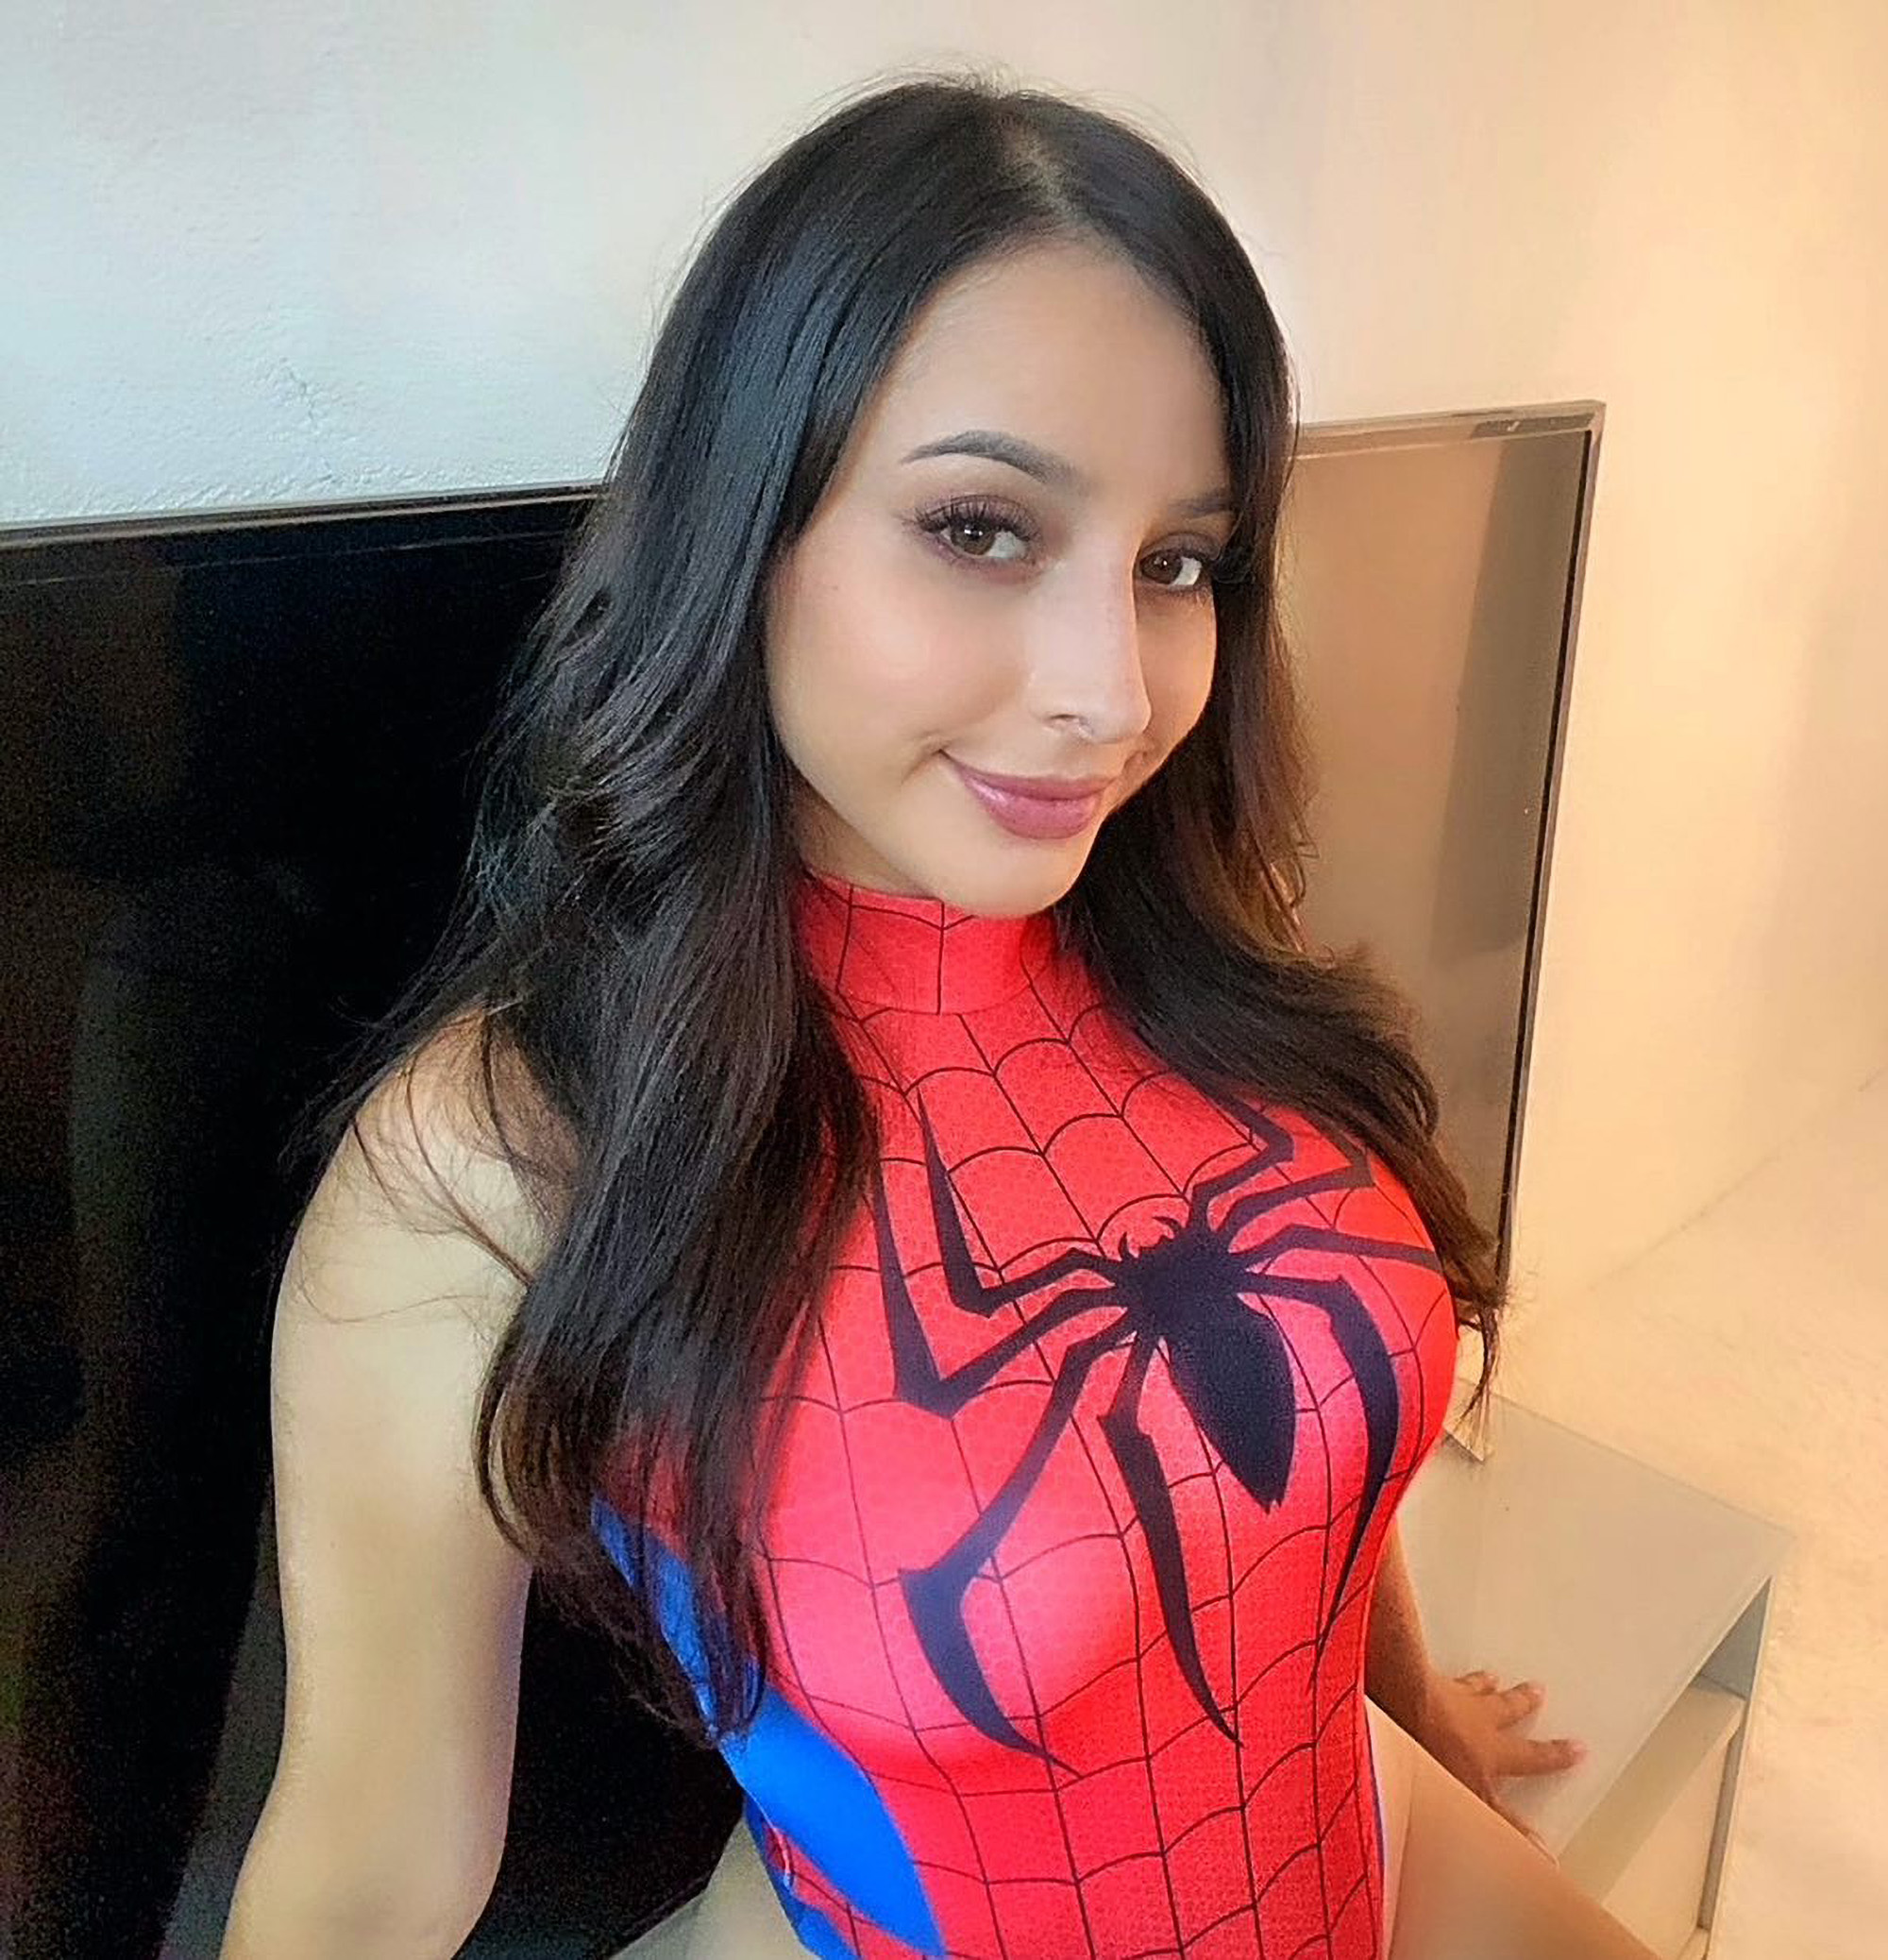 Read more about the article Sexy Influencer Goes Viral As Twerking Spider-Woman